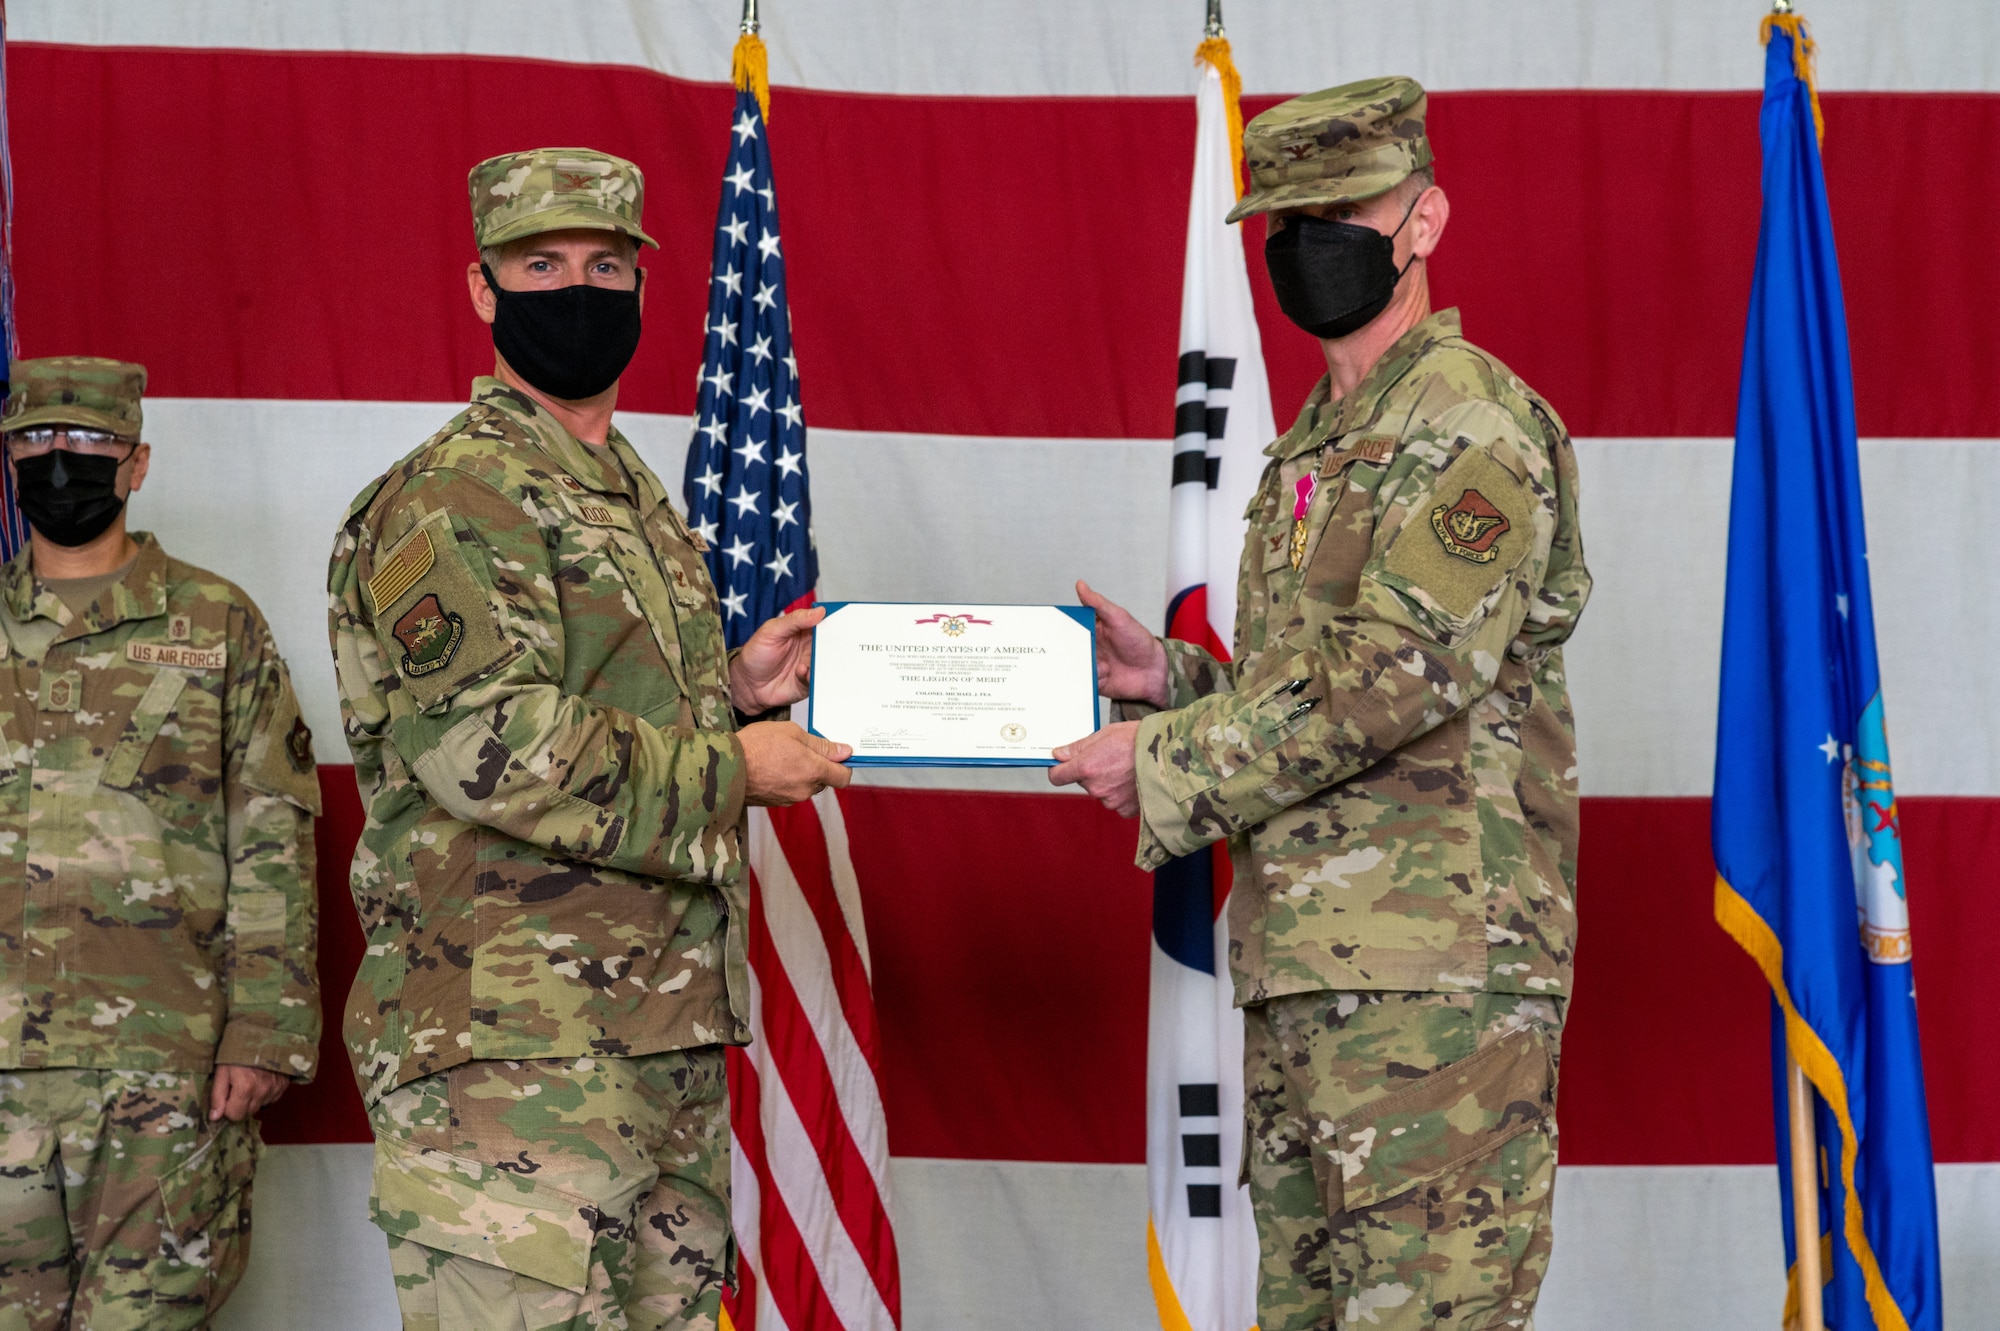 Col. Joshua Wood, 51st Fighter Wing commander, left, presents Col. Michael Fea, 51st Medical Group outgoing commander with a Legion of Merit decoration during the 51st Medical Group change of command ceremony at Osan Air Base, Republic of Korea, July 12, 2021. Fea earned the Legion of Merit for his meritorious conduct as the 51st Medical Group commander. (U.S. Air Force photo by Tech. Sgt. Nicholas Alder)